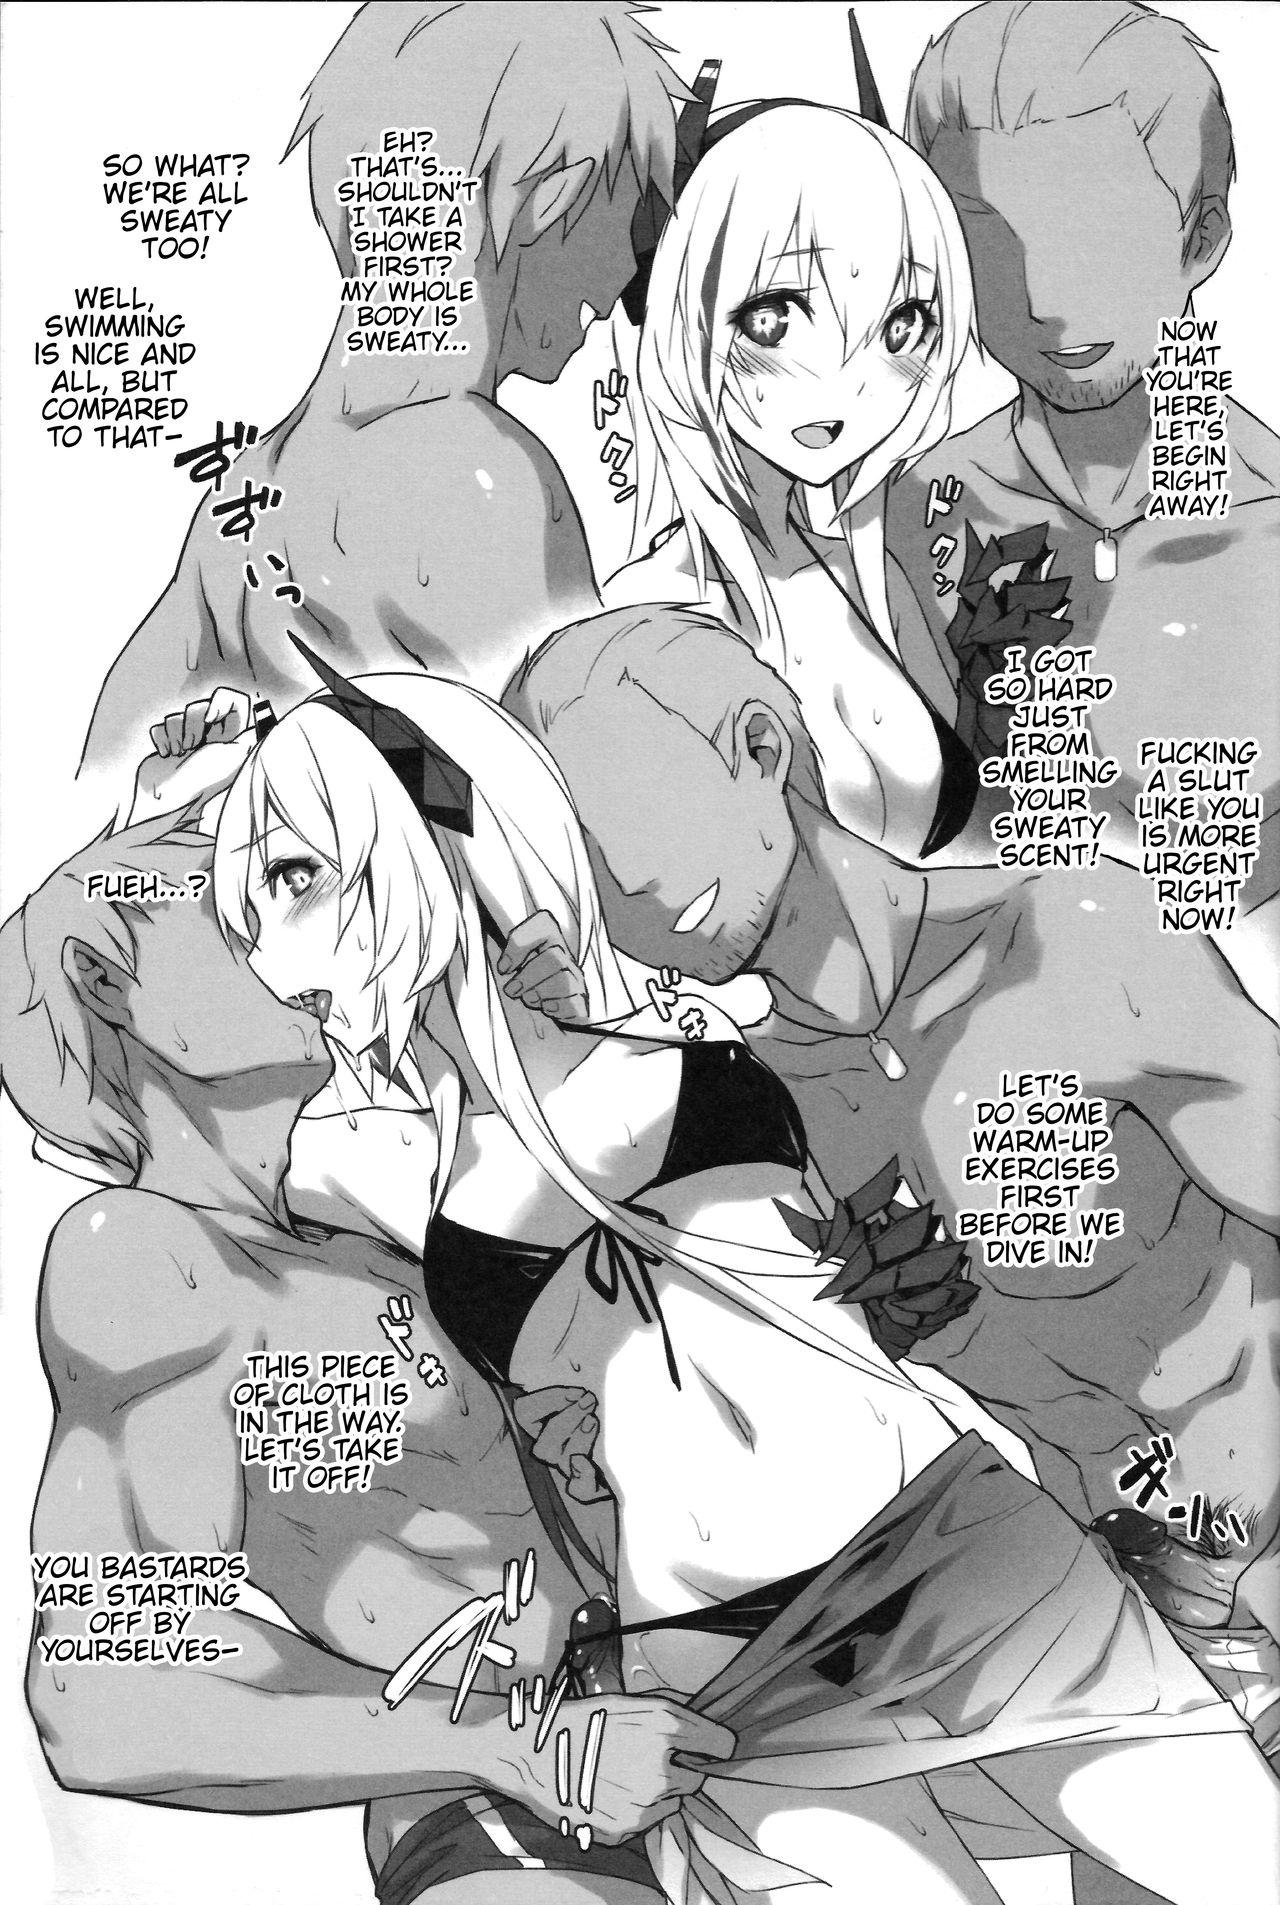 Swinger Grifon Summer Swimsuit Sex Party - Girls frontline Doggie Style Porn - Page 4